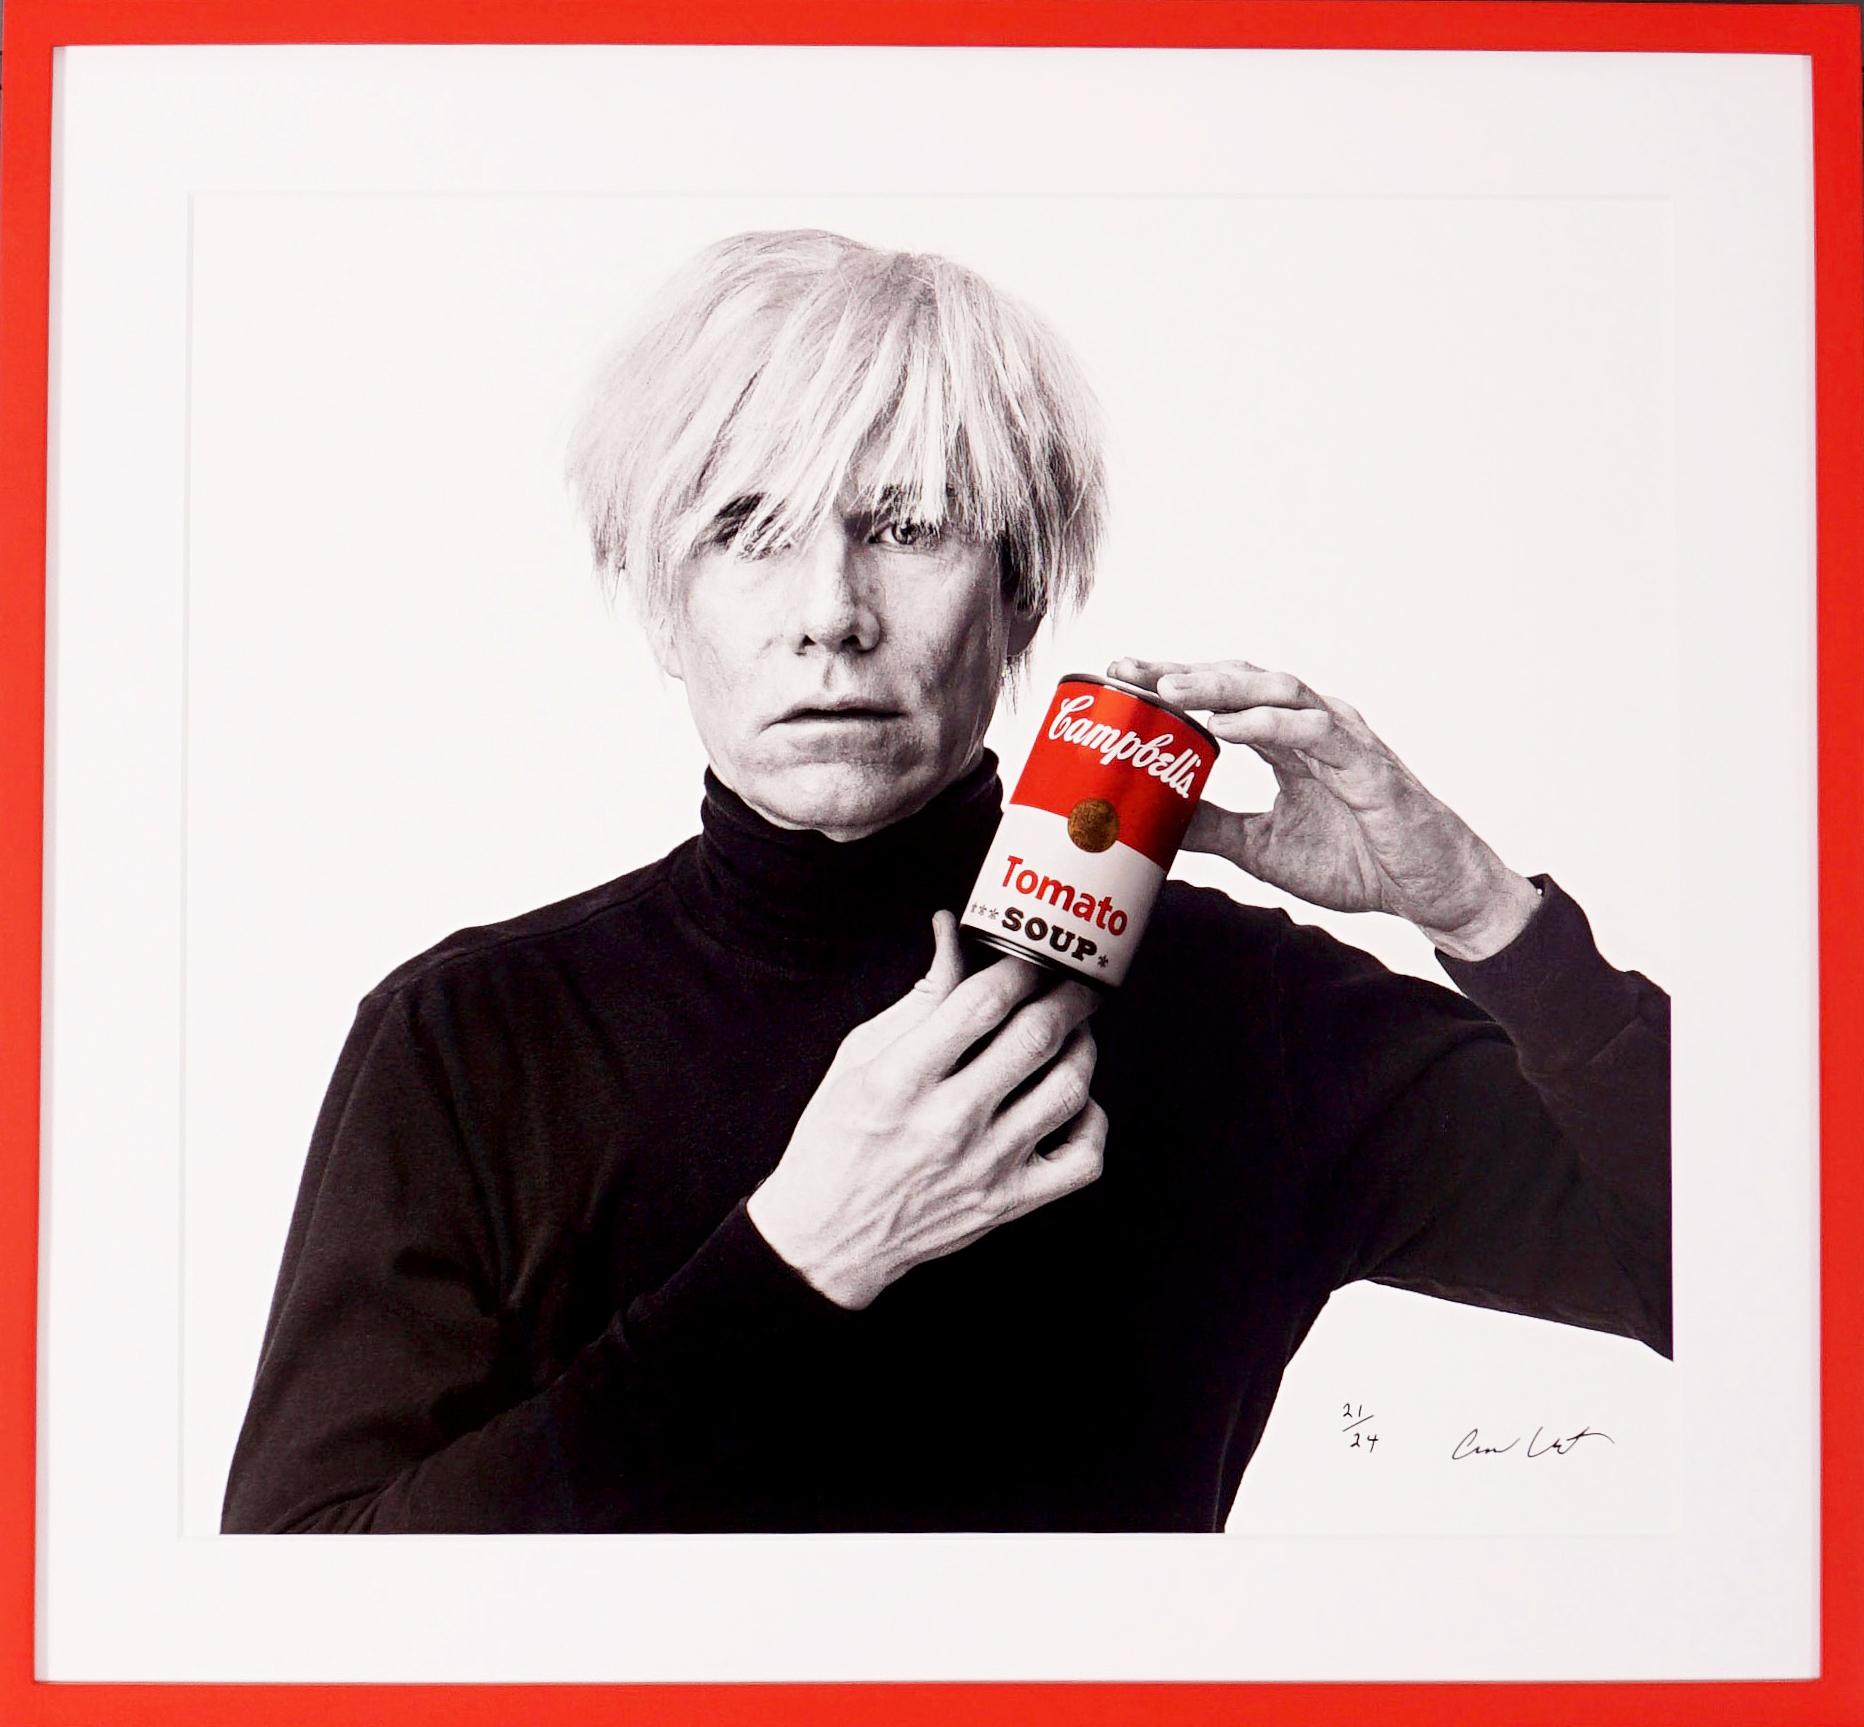 The �‘Andy Warhol with Campbell’s Soup Can’ was shot in 1985 by photographer Andrew Unangst. This spectacular image of Warhol is one of the very last taken  and part of an exclusive edition of prints released in 2017 as the photos had been in